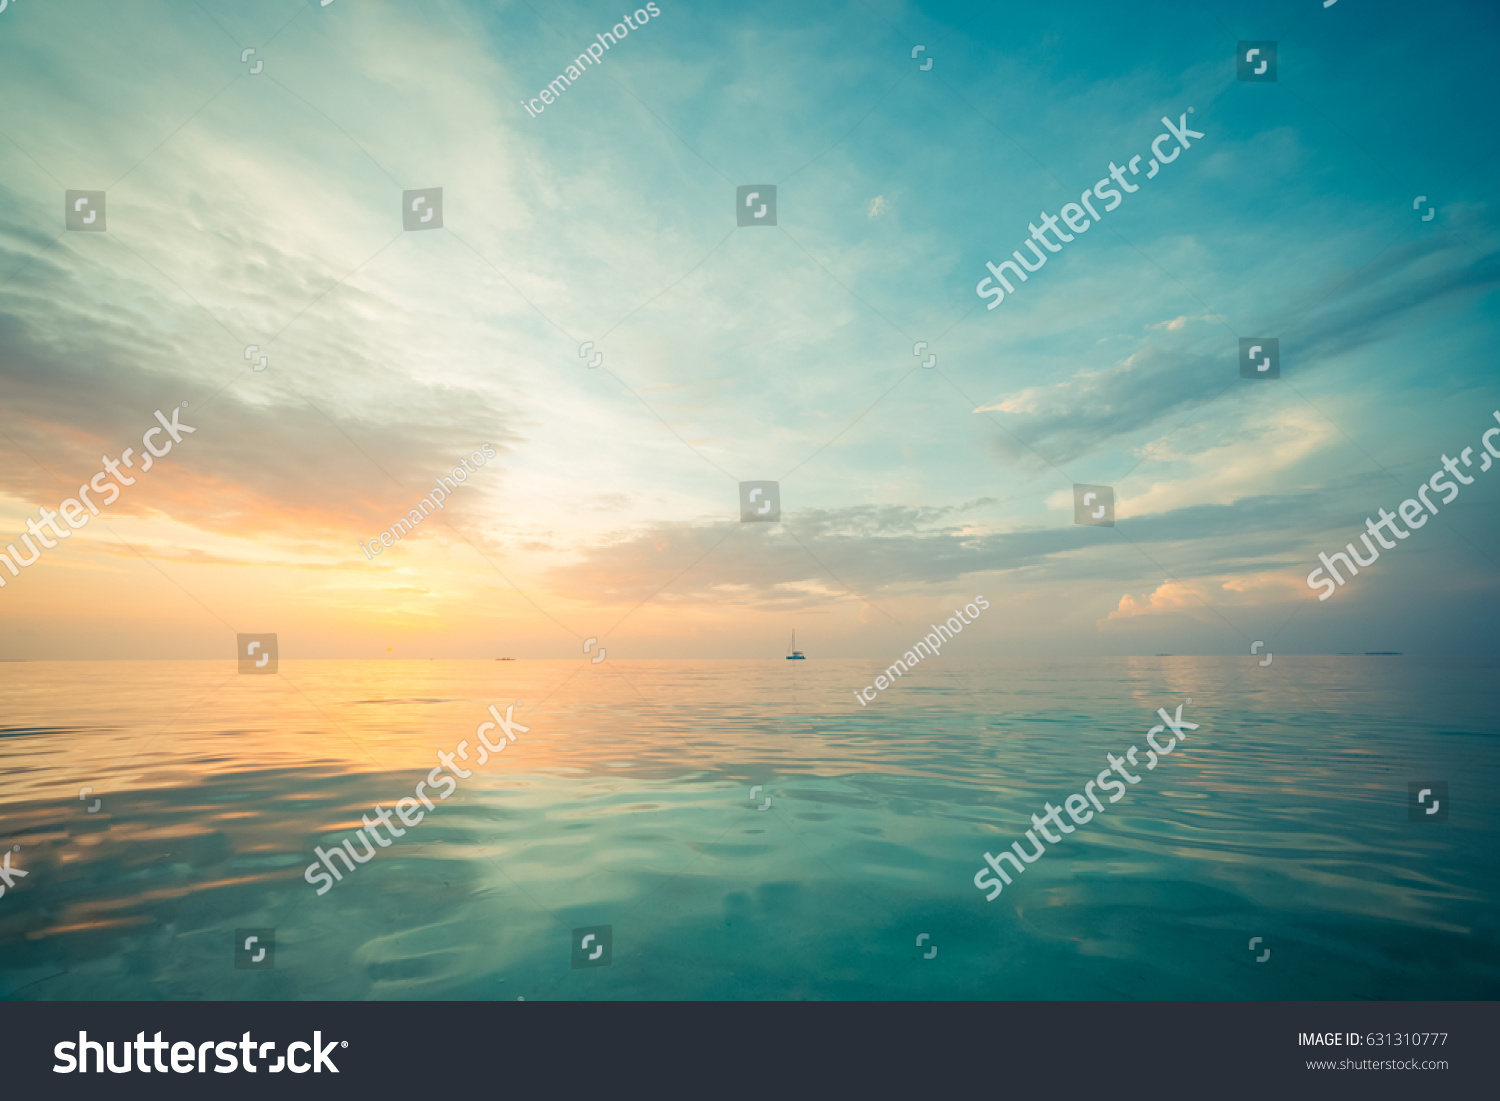 Relaxing seascape with wide horizon of the sky and the sea #631310777